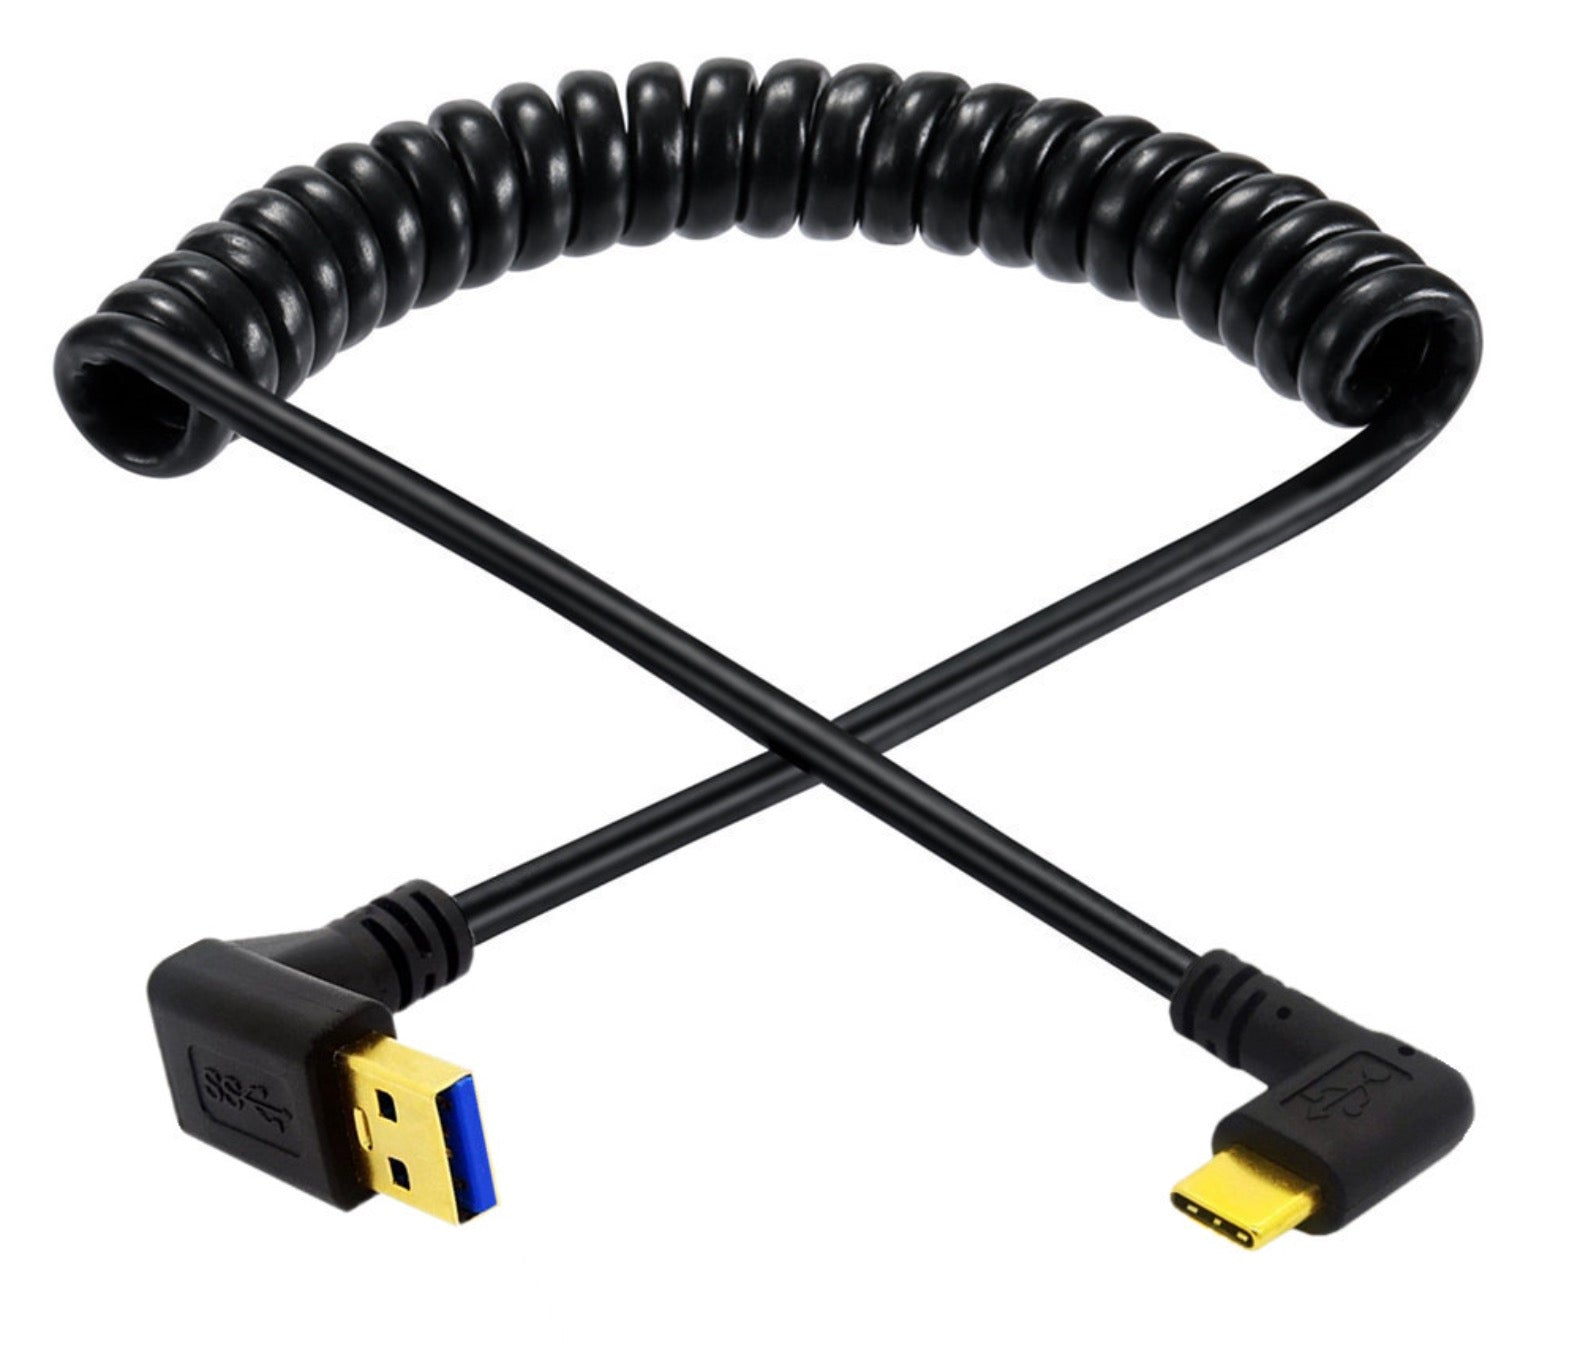 USB C Type-C Male to USB 3.0 A Male Spiral Cable - Down Angle